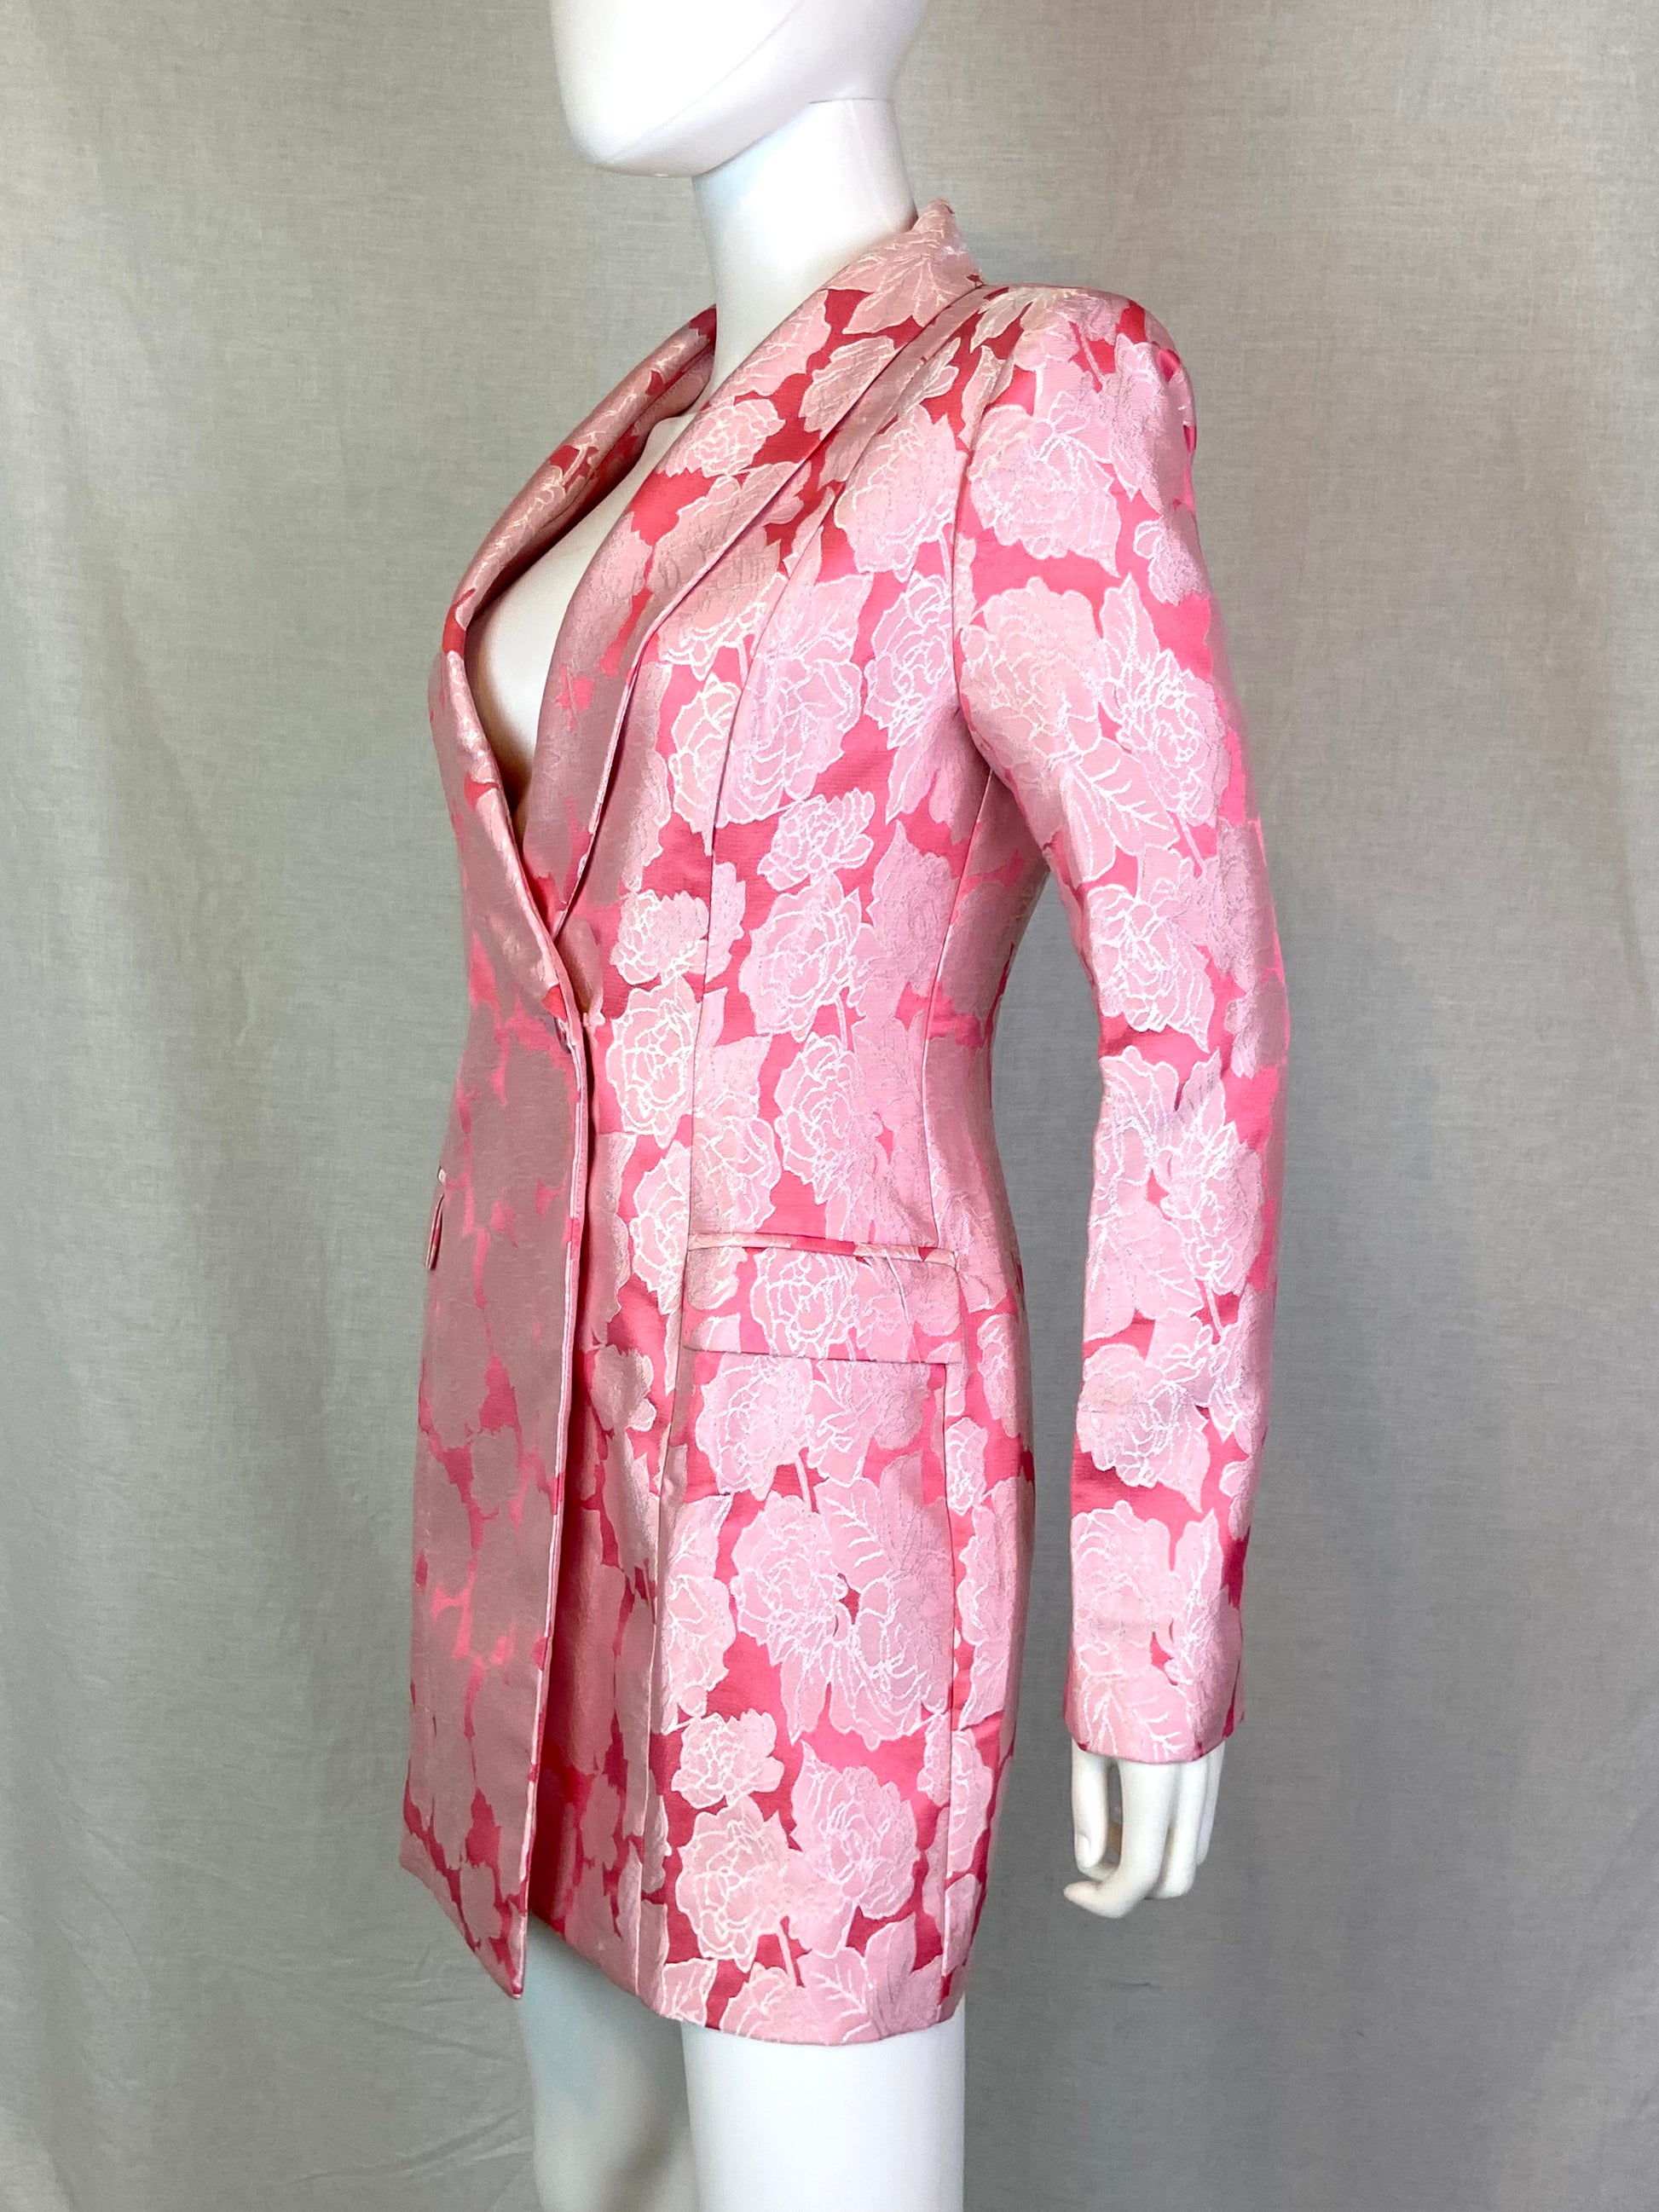 Pink Satin Floral Dress Coat Small ABBY ESSIE STUDIOS